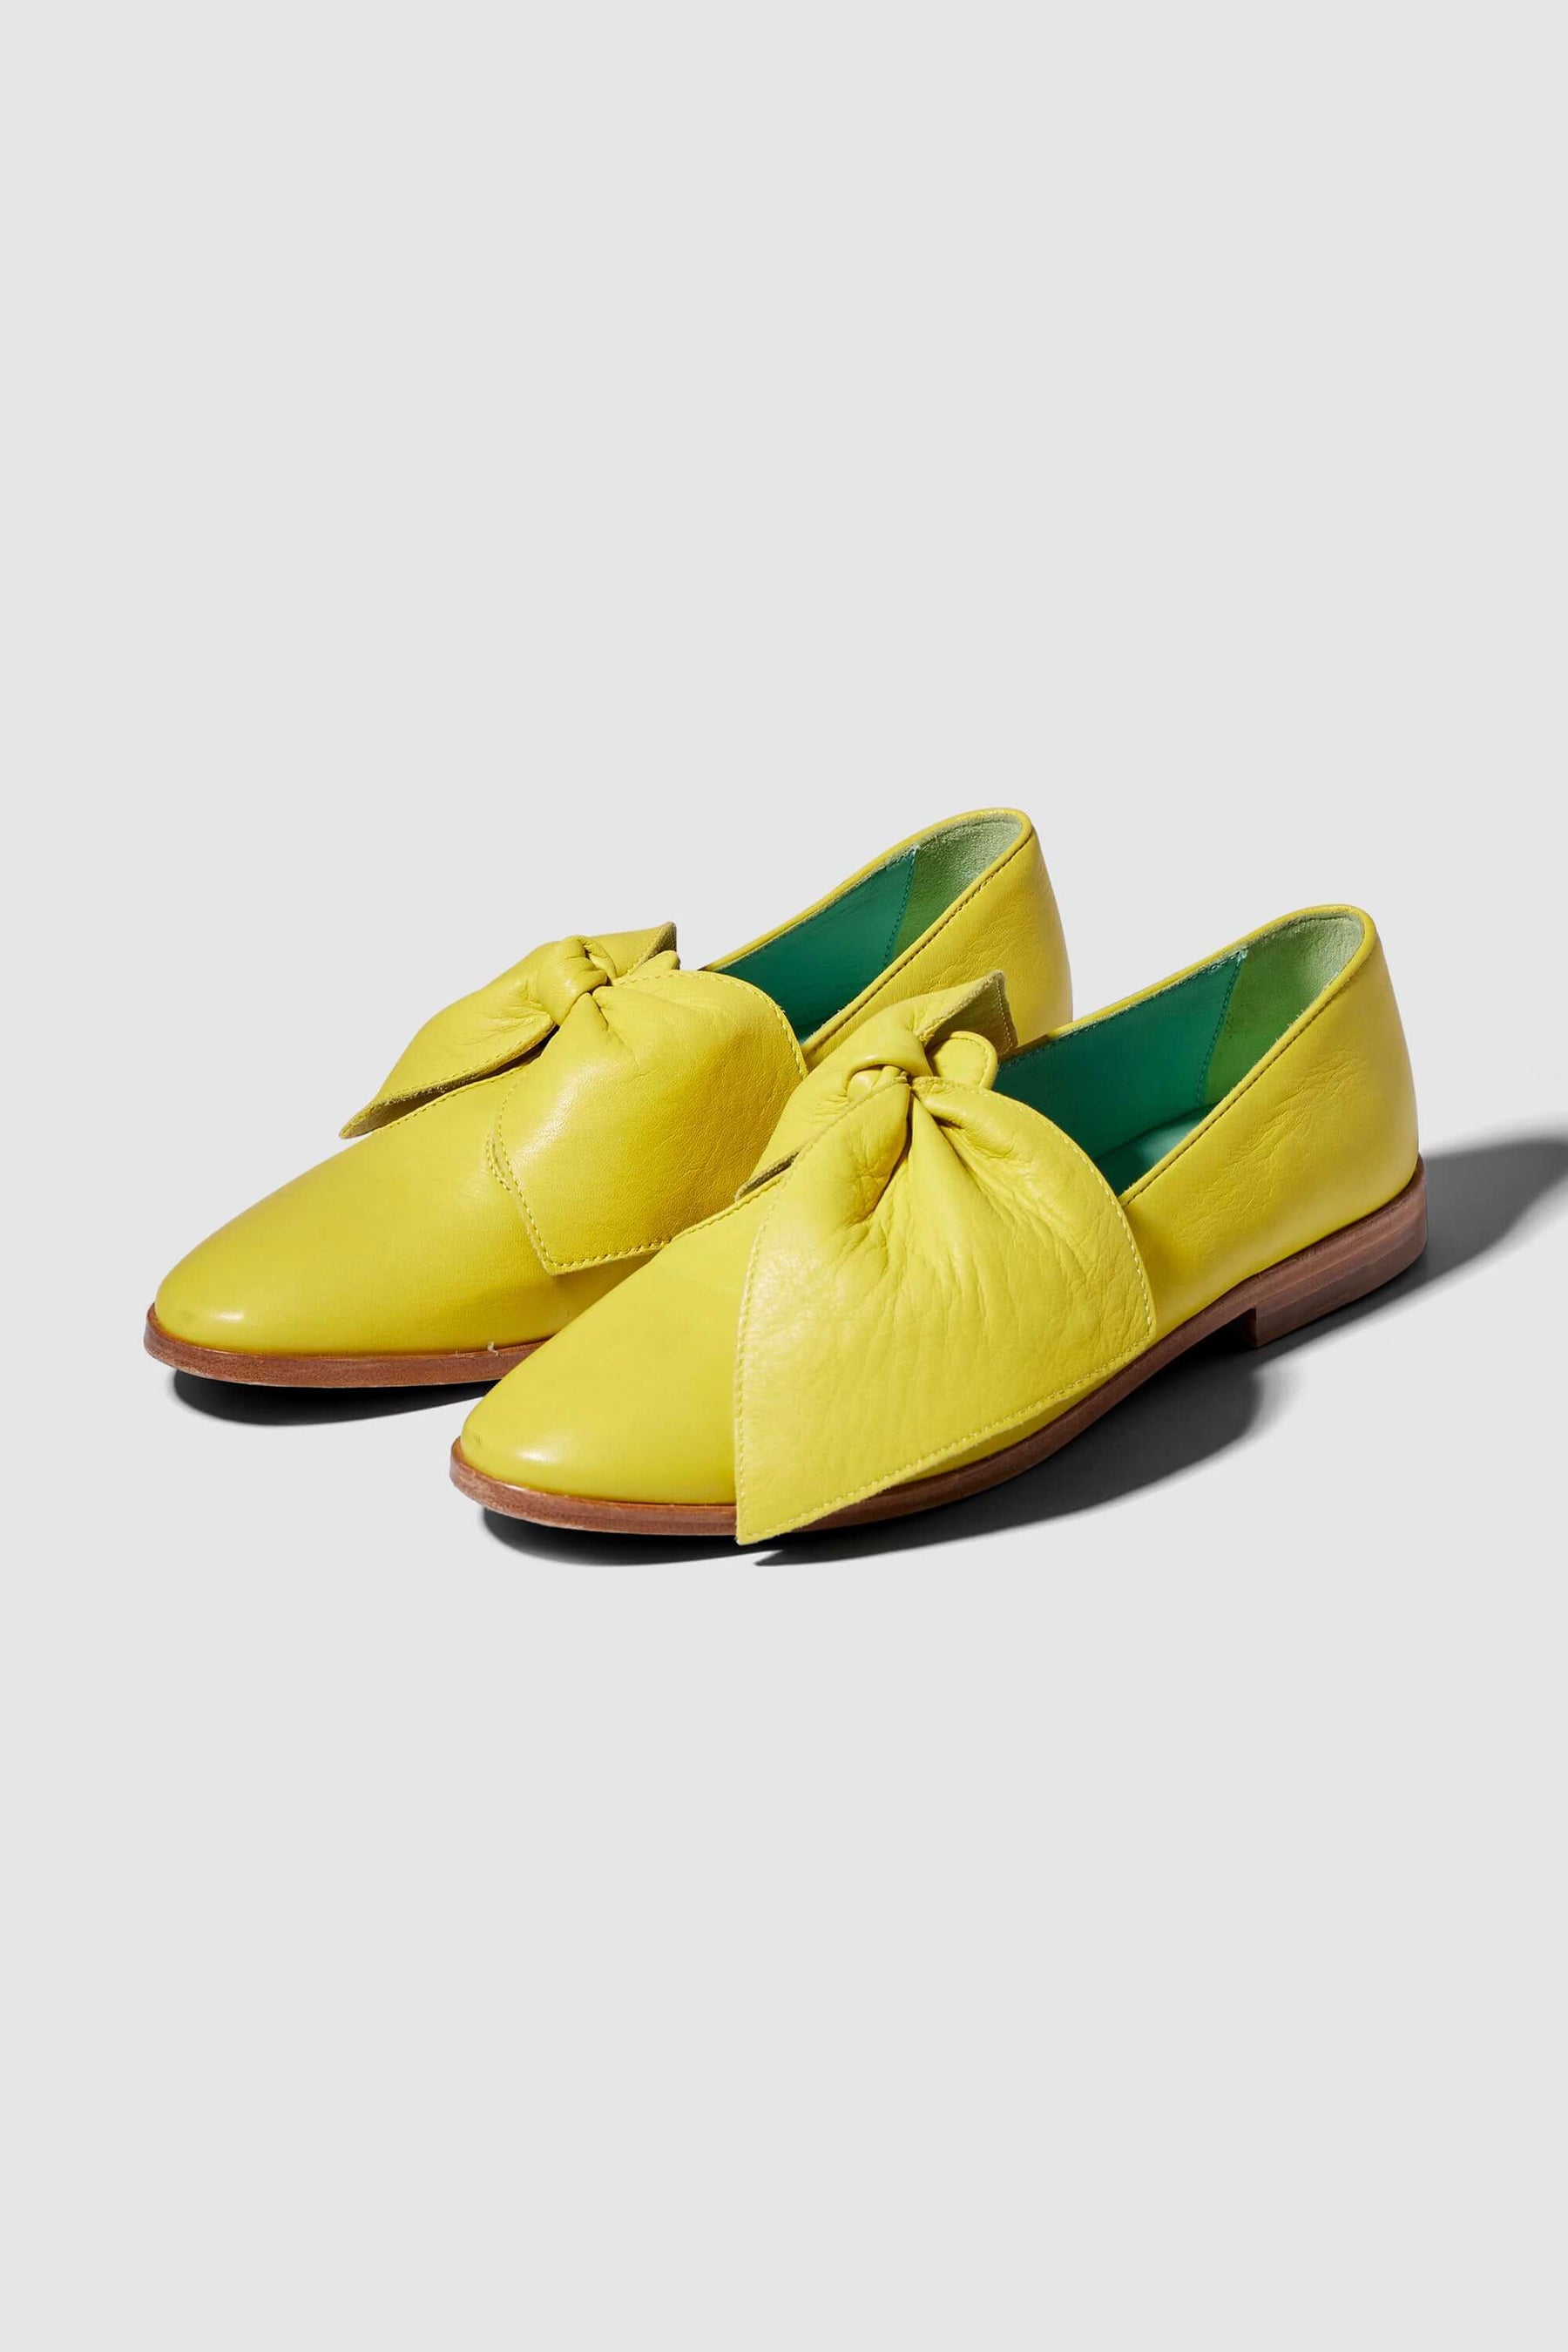 BB ballerina shoes in yellow leather